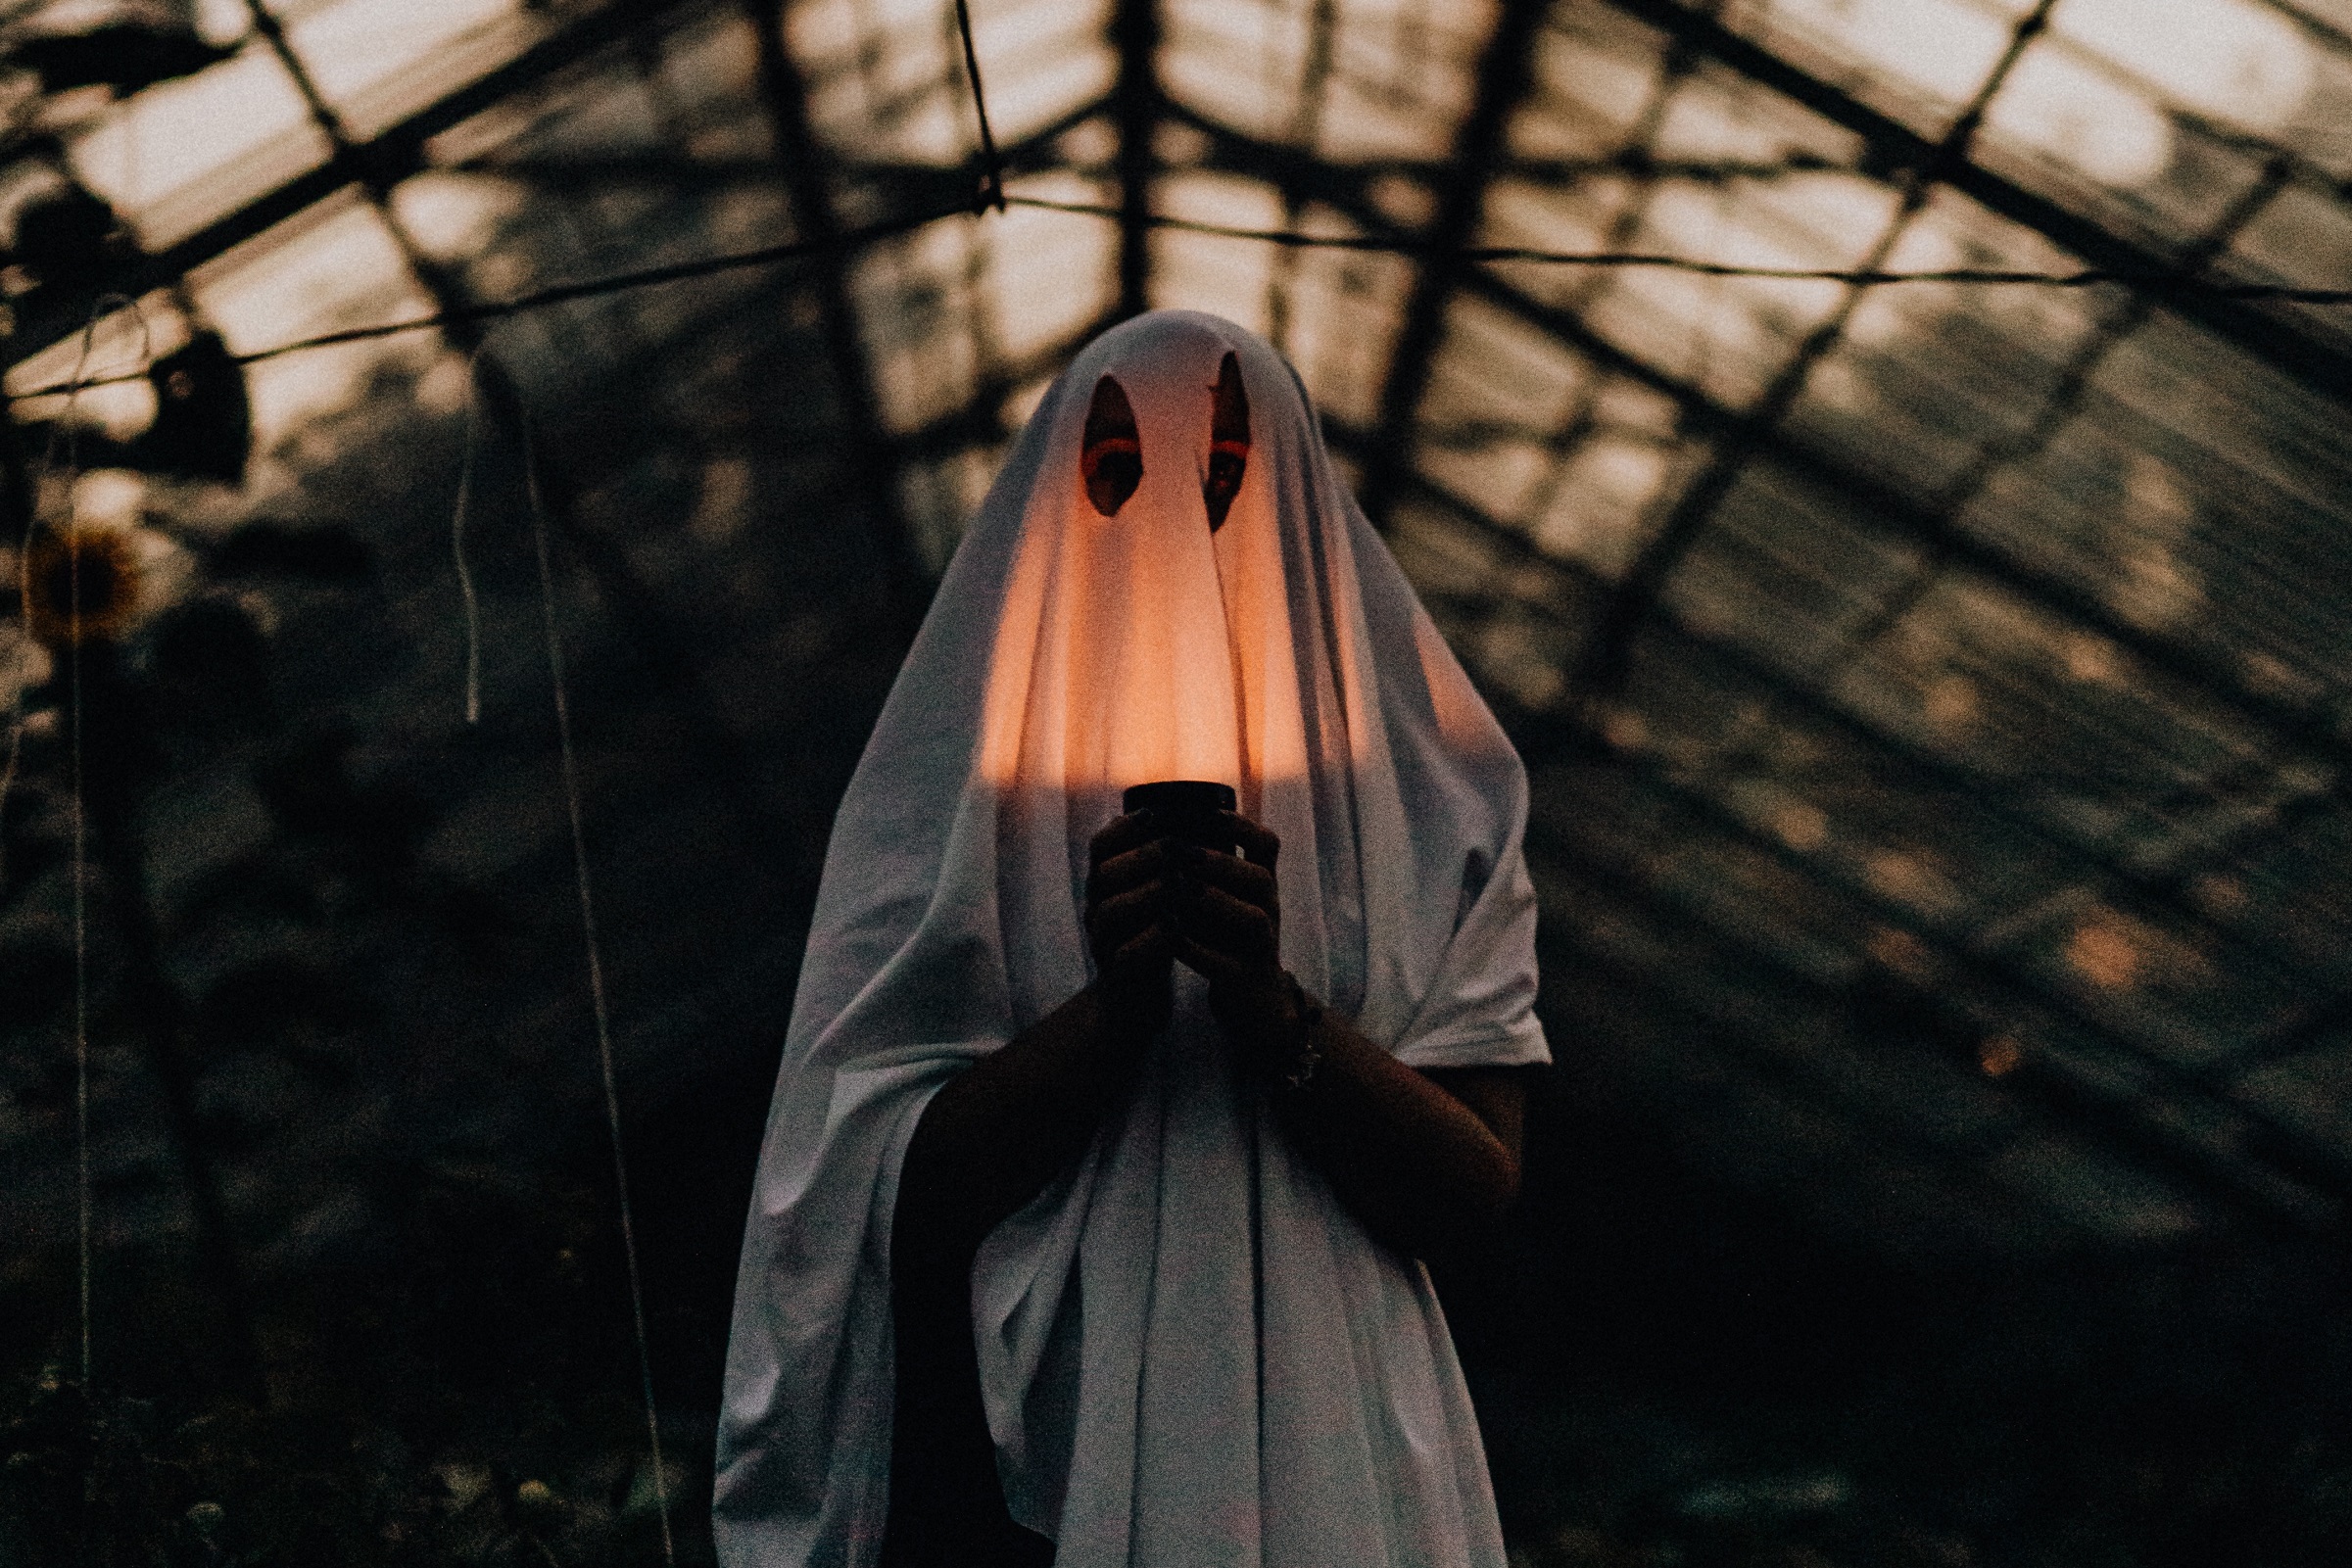 A person dressed as a ghost stands in a greenhouse with a candle illuminating their "face."